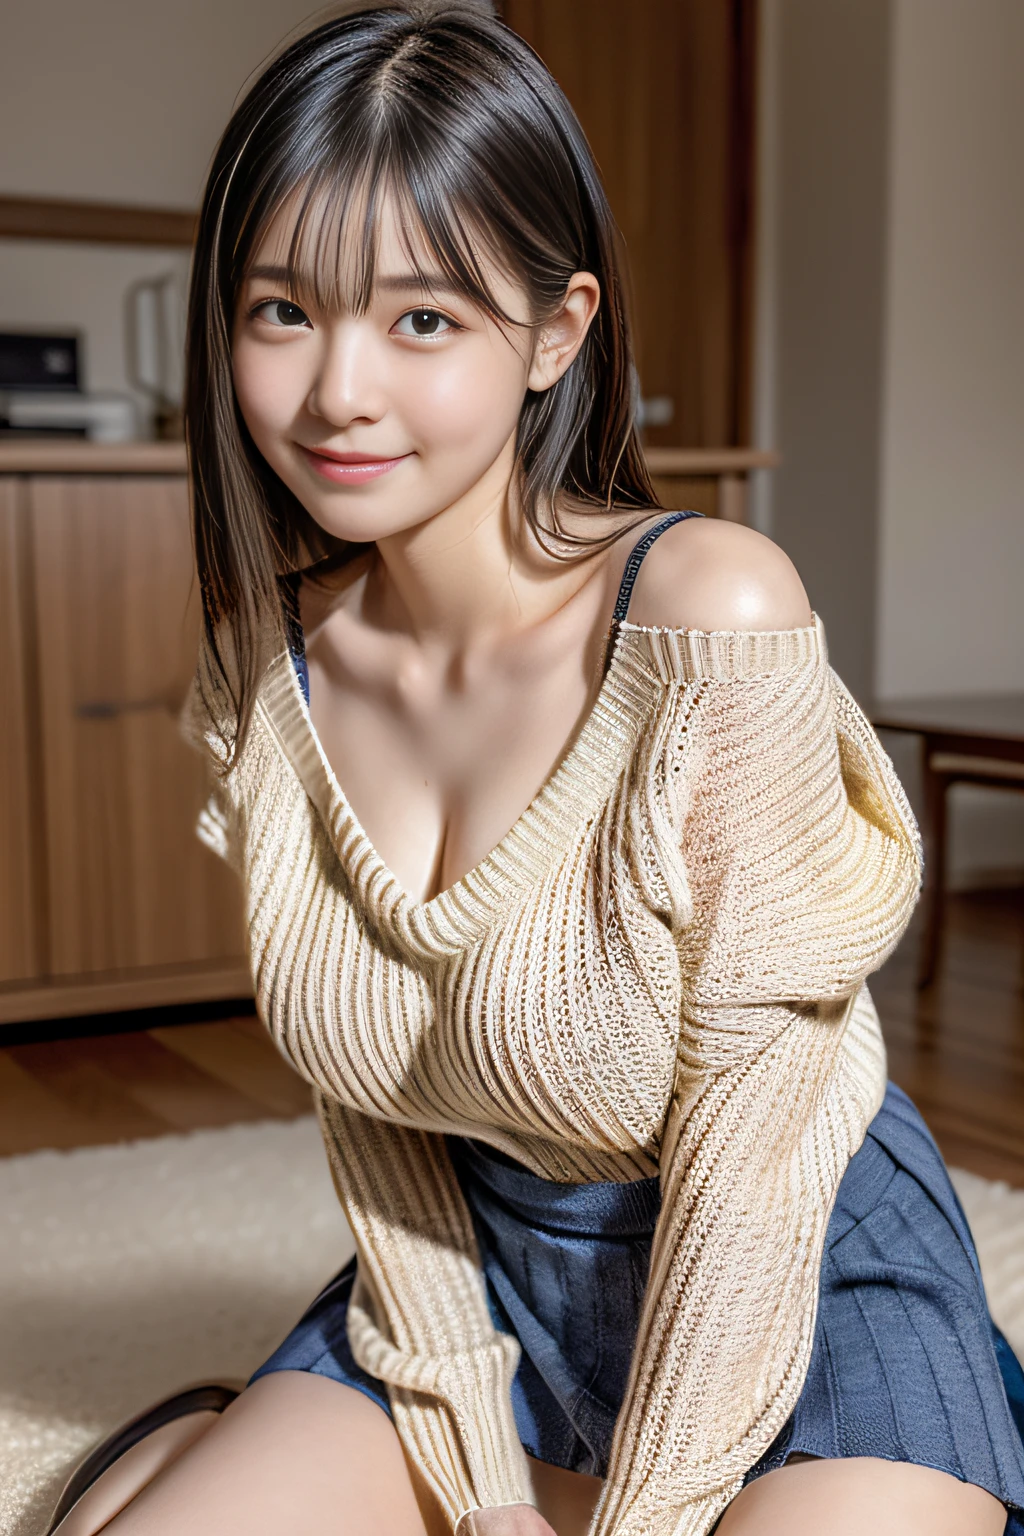 Enhanced dynamic perspective，Cute cute beautiful girl、15yo student, (Huge breasts:1.3), busty, Flowing sweat, narrow shoulder,((V-neck sweater:1.3)), Wool, Oversize, (((Mini skirt)))、Get down on one knee, Spread legs, Leaning forward, Put one hand on the floor, see through,Look at me and smile，simple backgound，Works of masters，high quarity，4K resolution，super-fine，Detailed pubic hair，acurate，Cinematic lighting，Leaves the original facial proportions